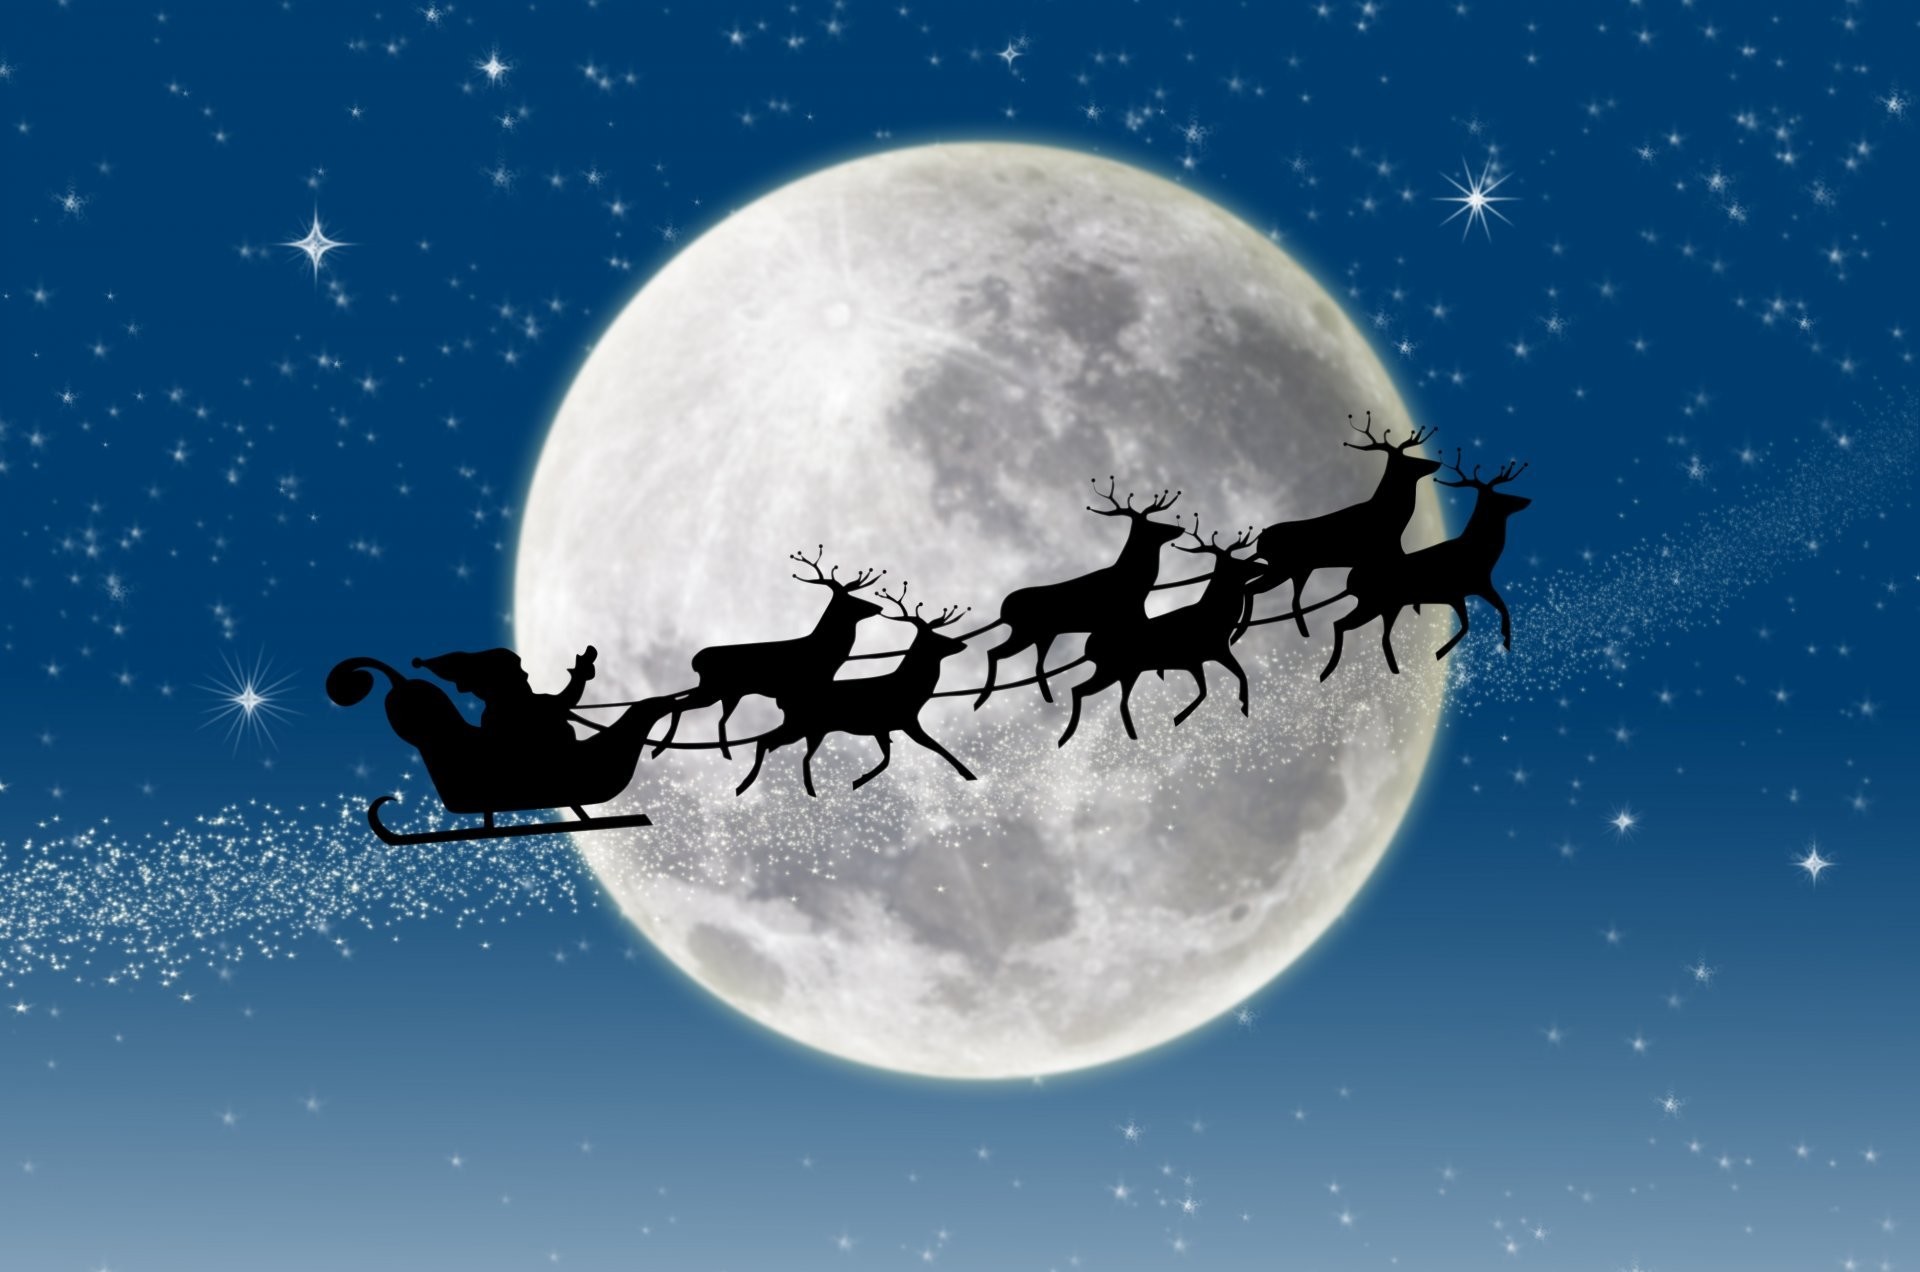 1920x1272 new year merry christmas snow full moon reindeer stars santa claus coming  new year merry christmas